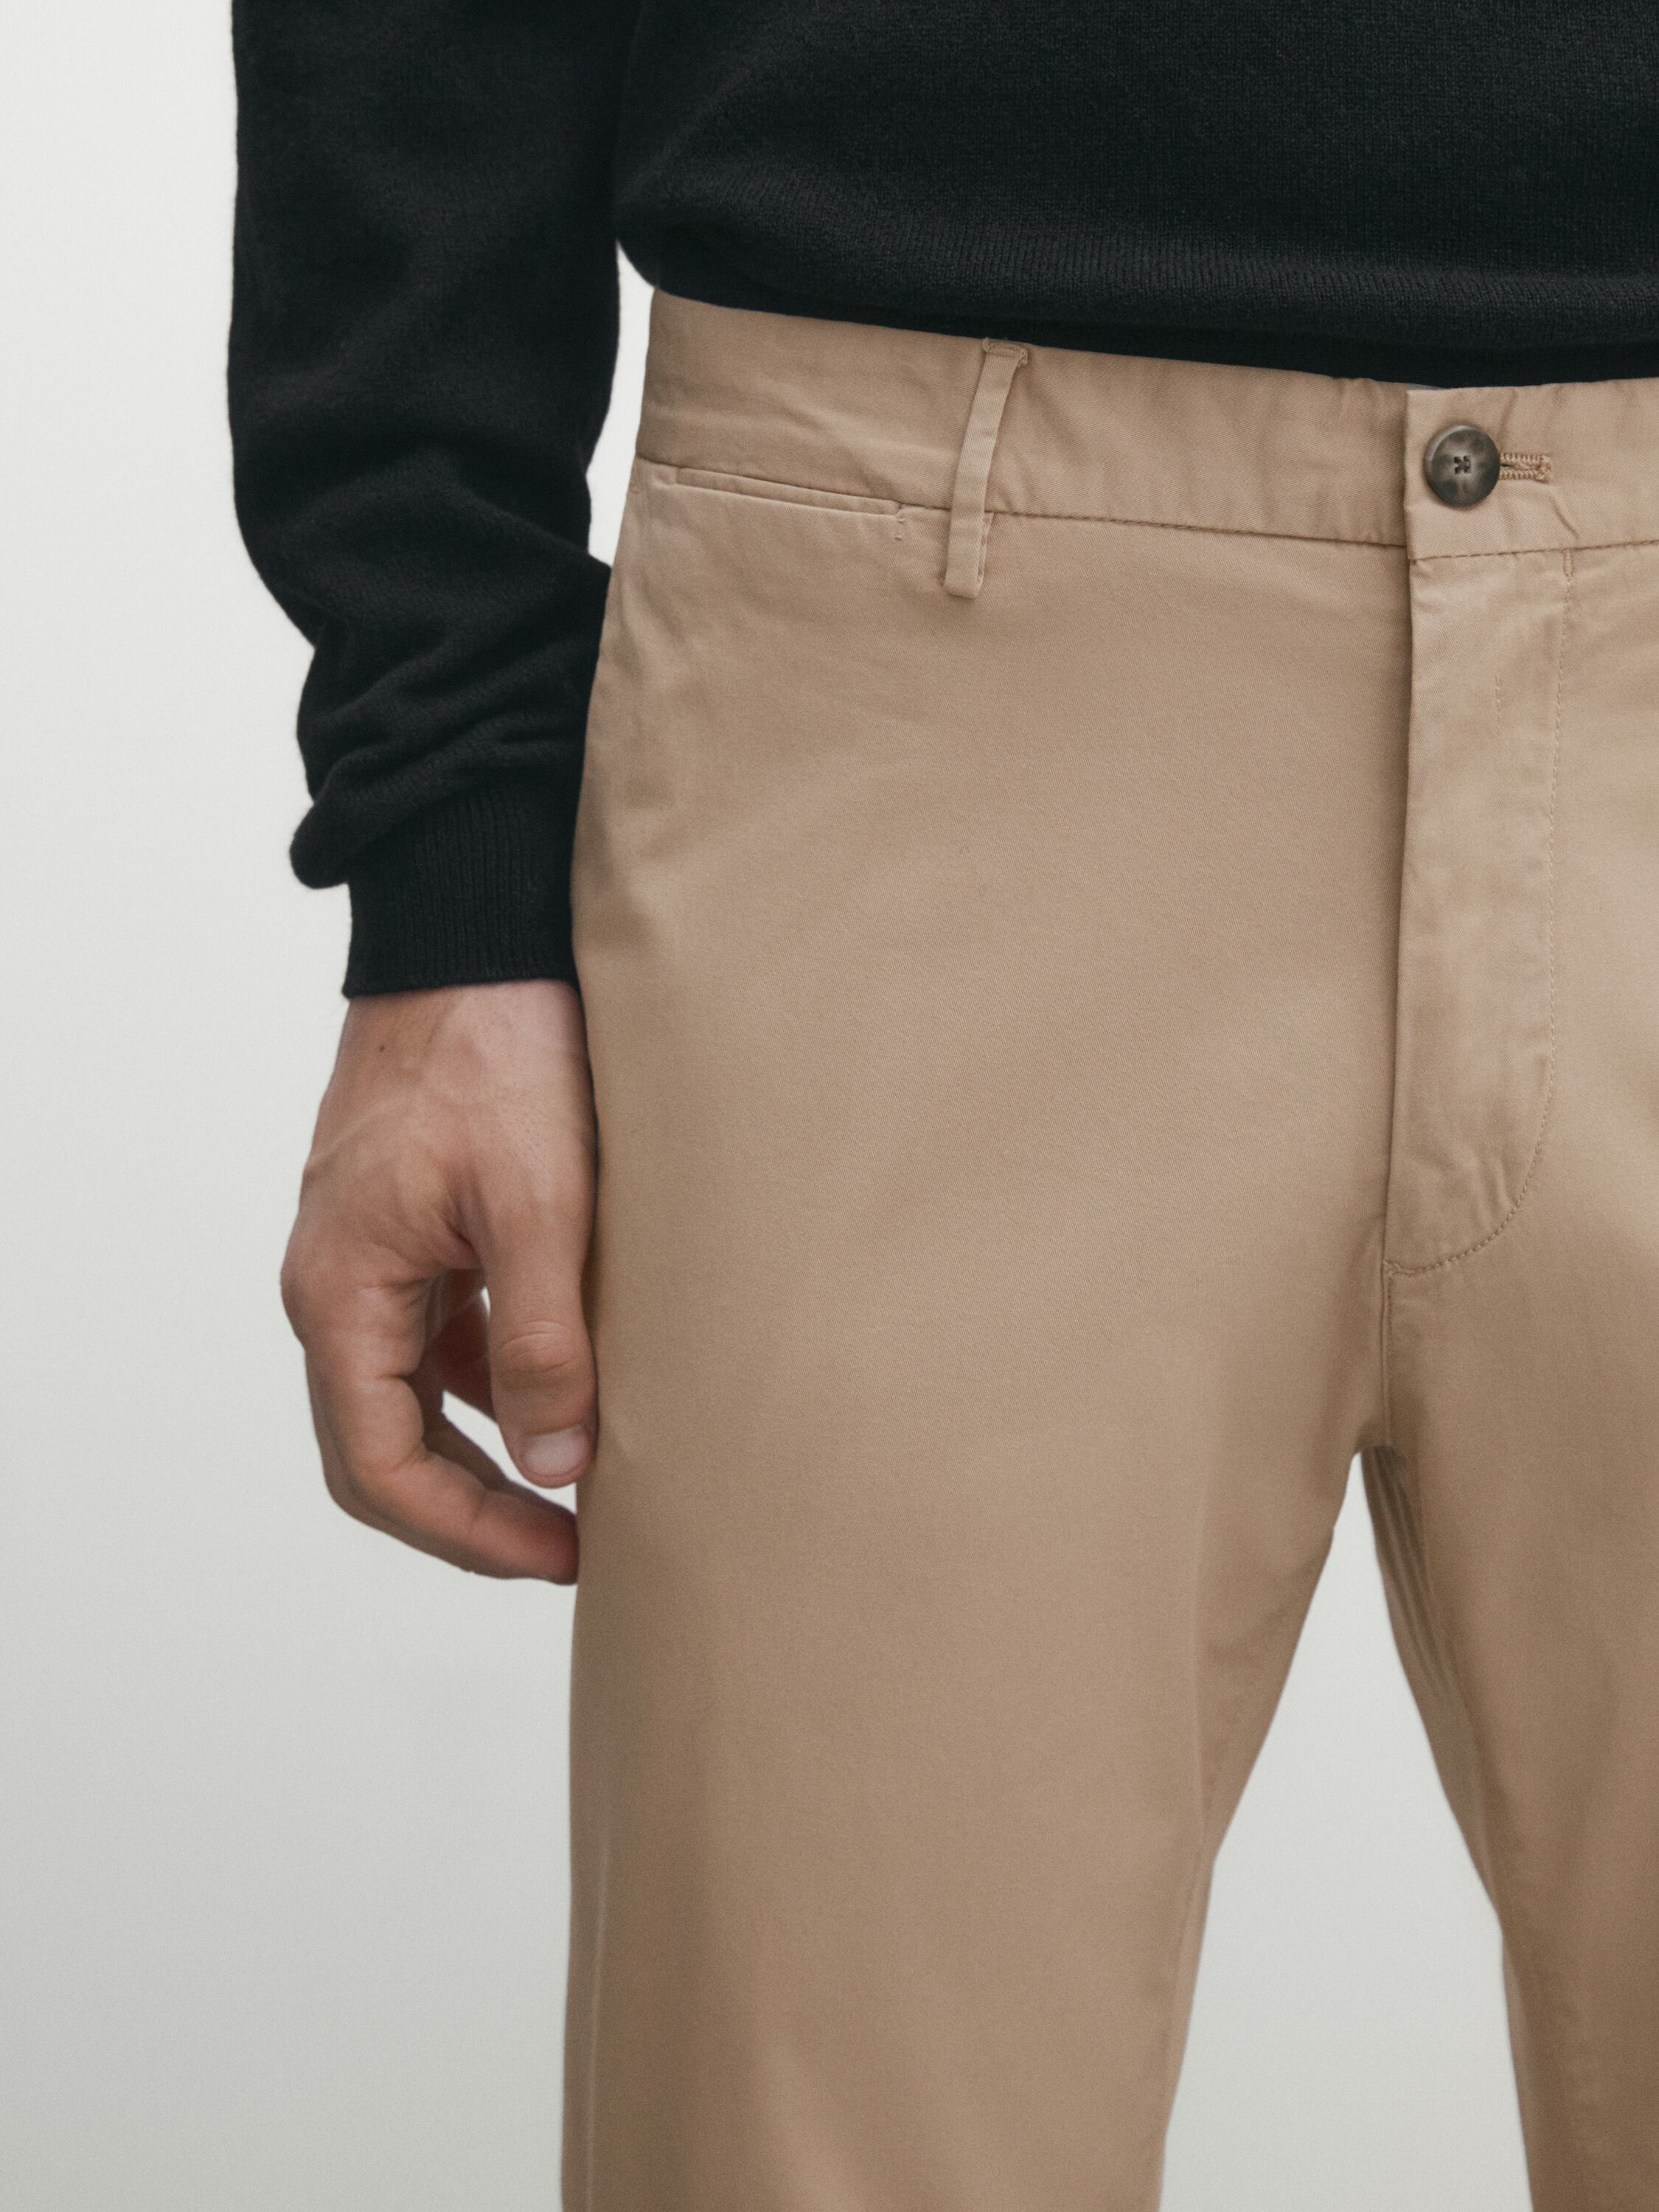 Slim fit cotton blend chino trousers